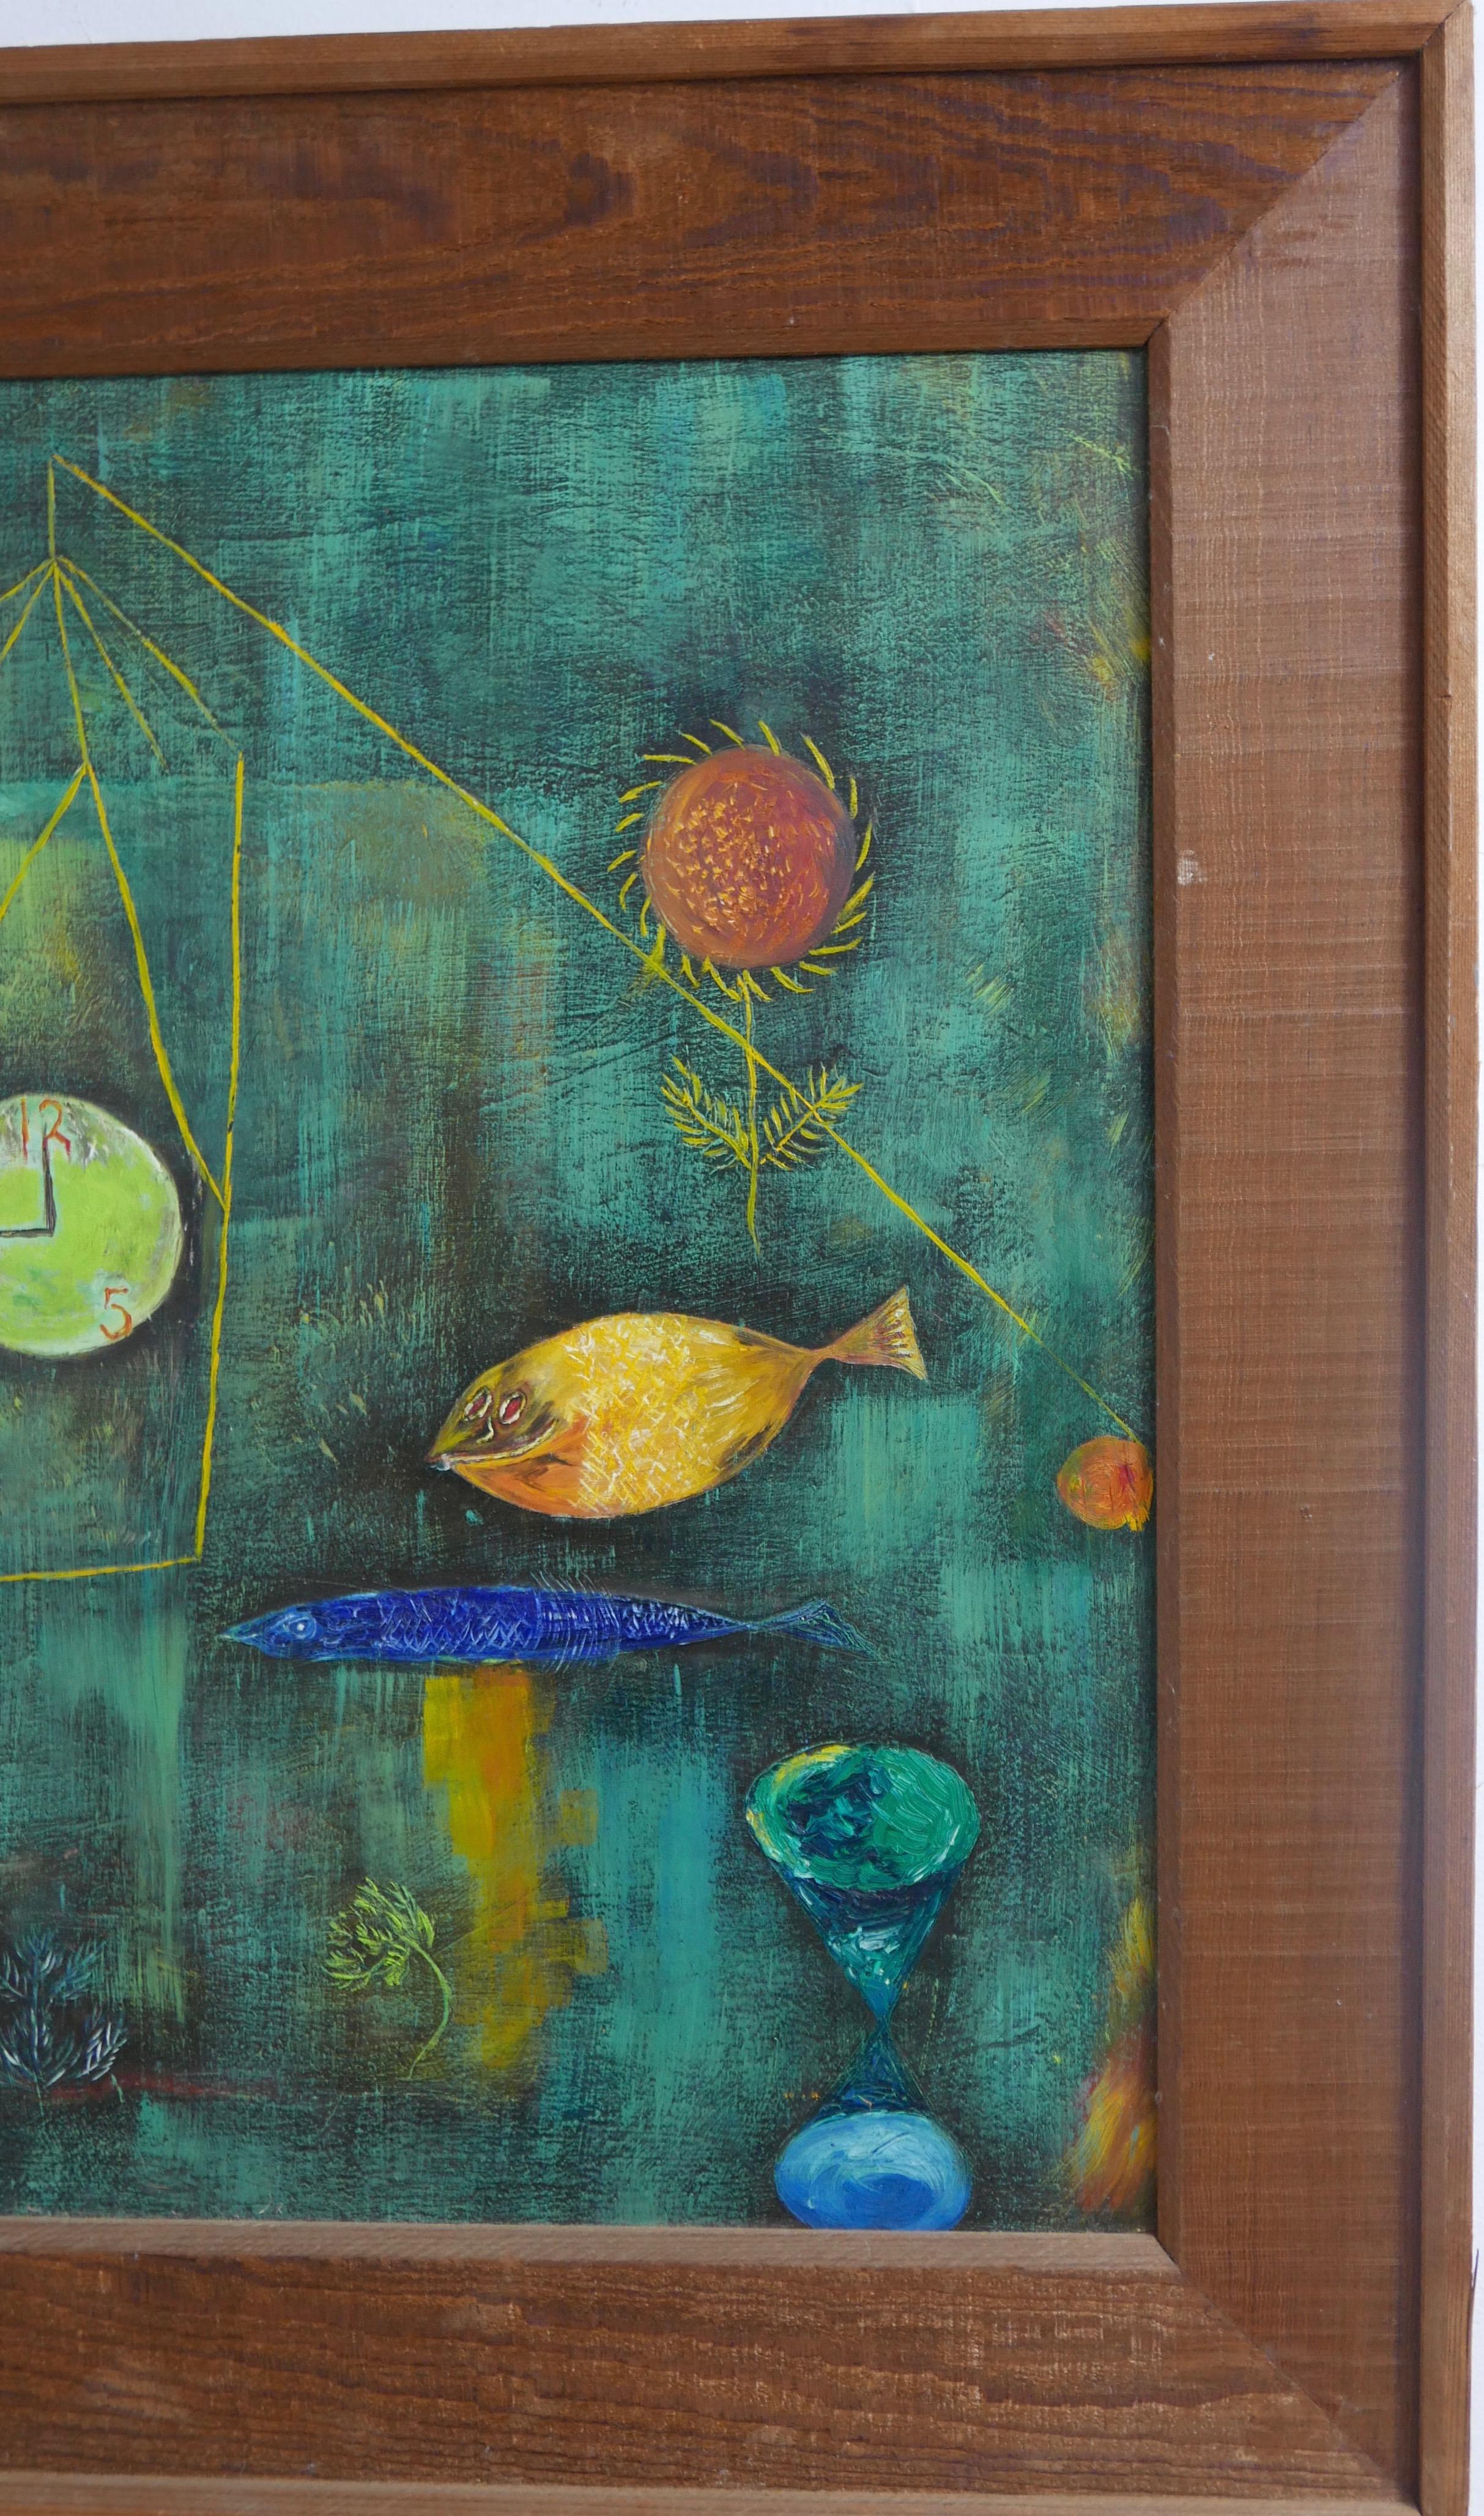  American Dreamlike Surrealist / Abstract Underwater Painting in Rustic Frame For Sale 1